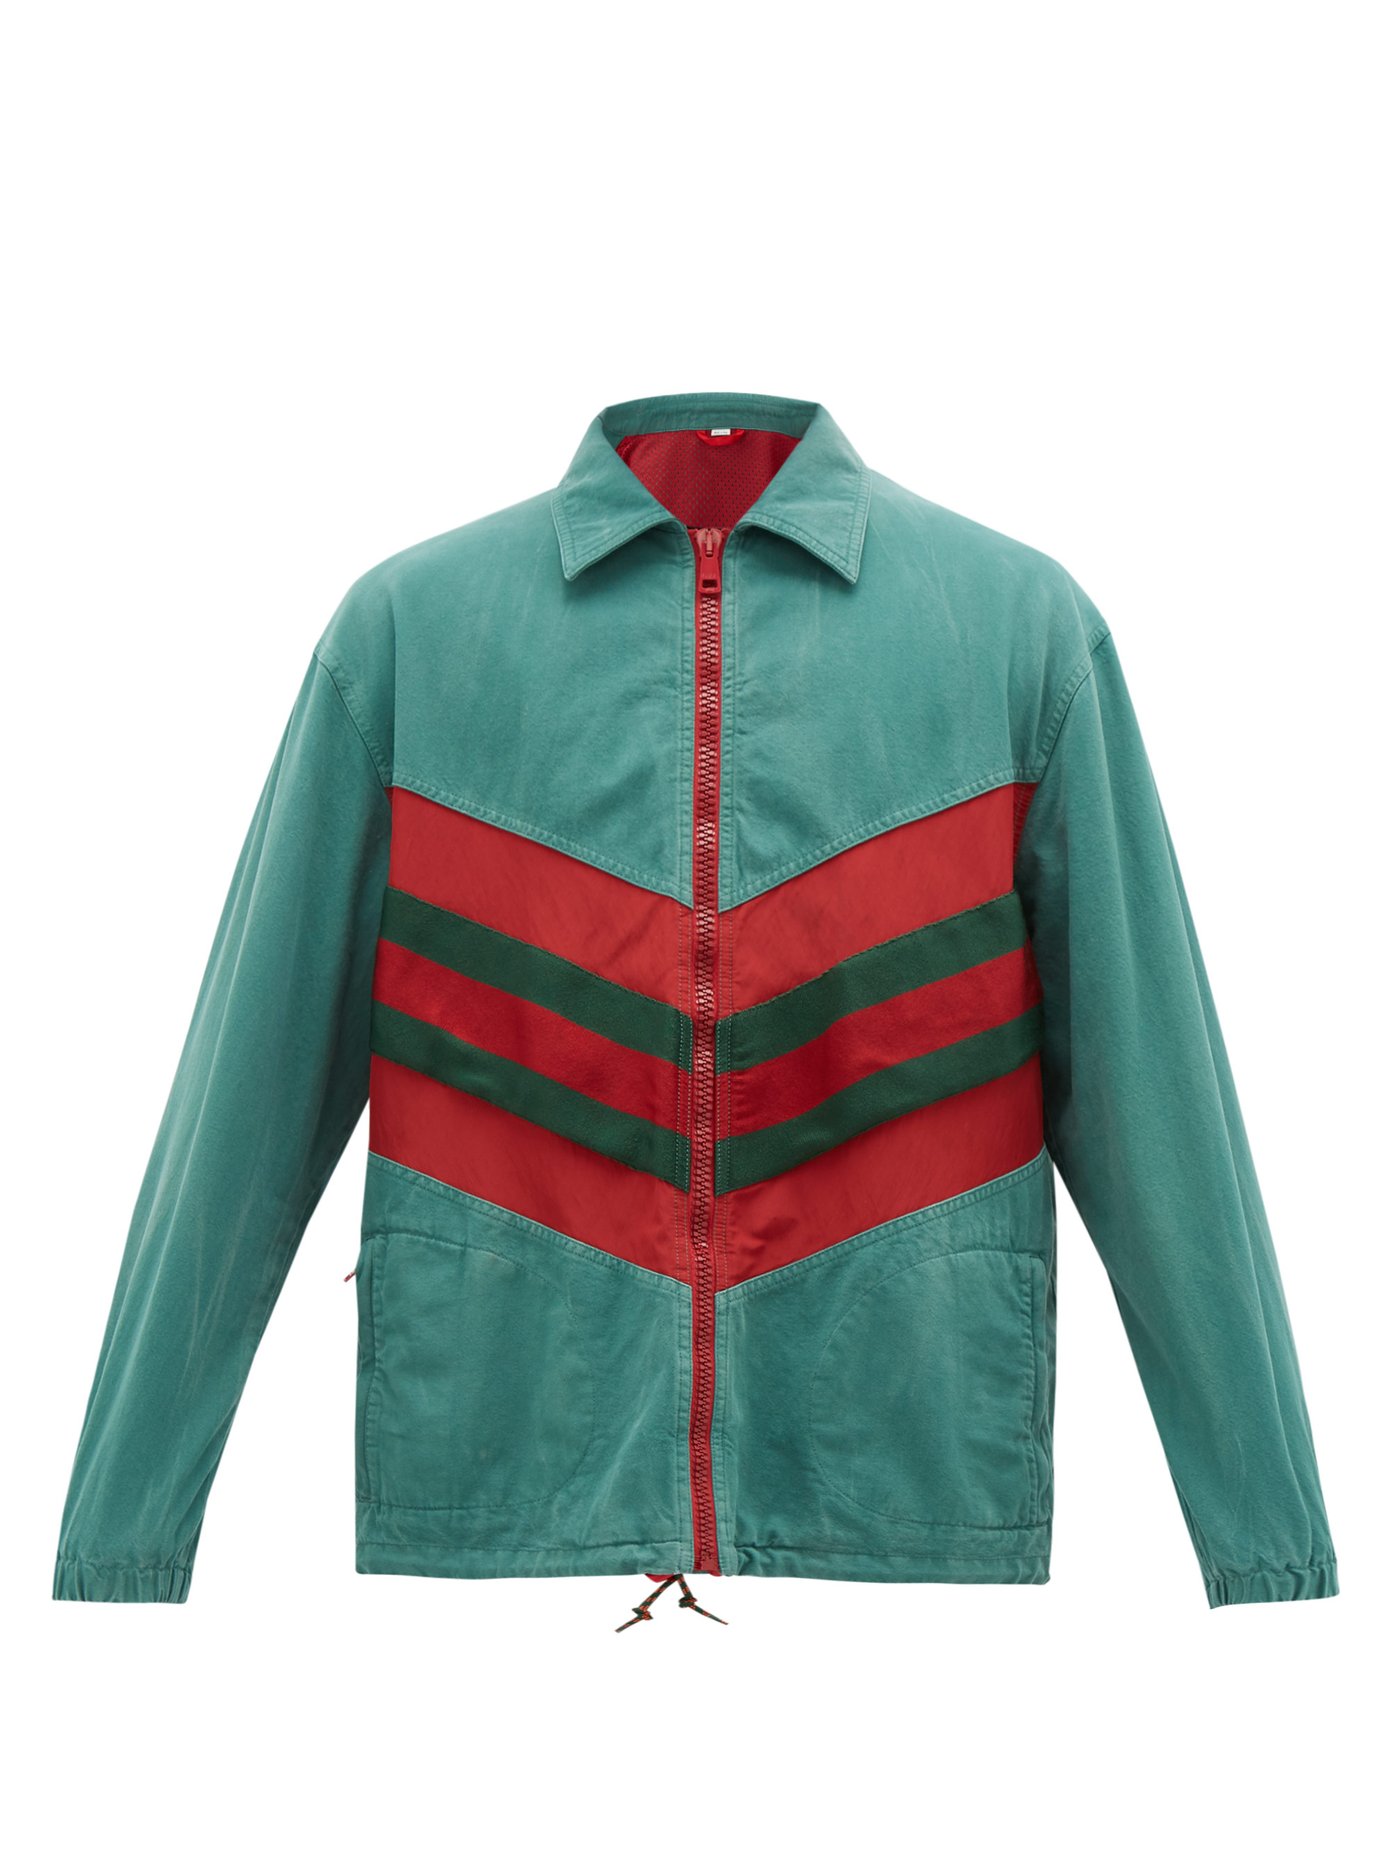 gucci jacket green red